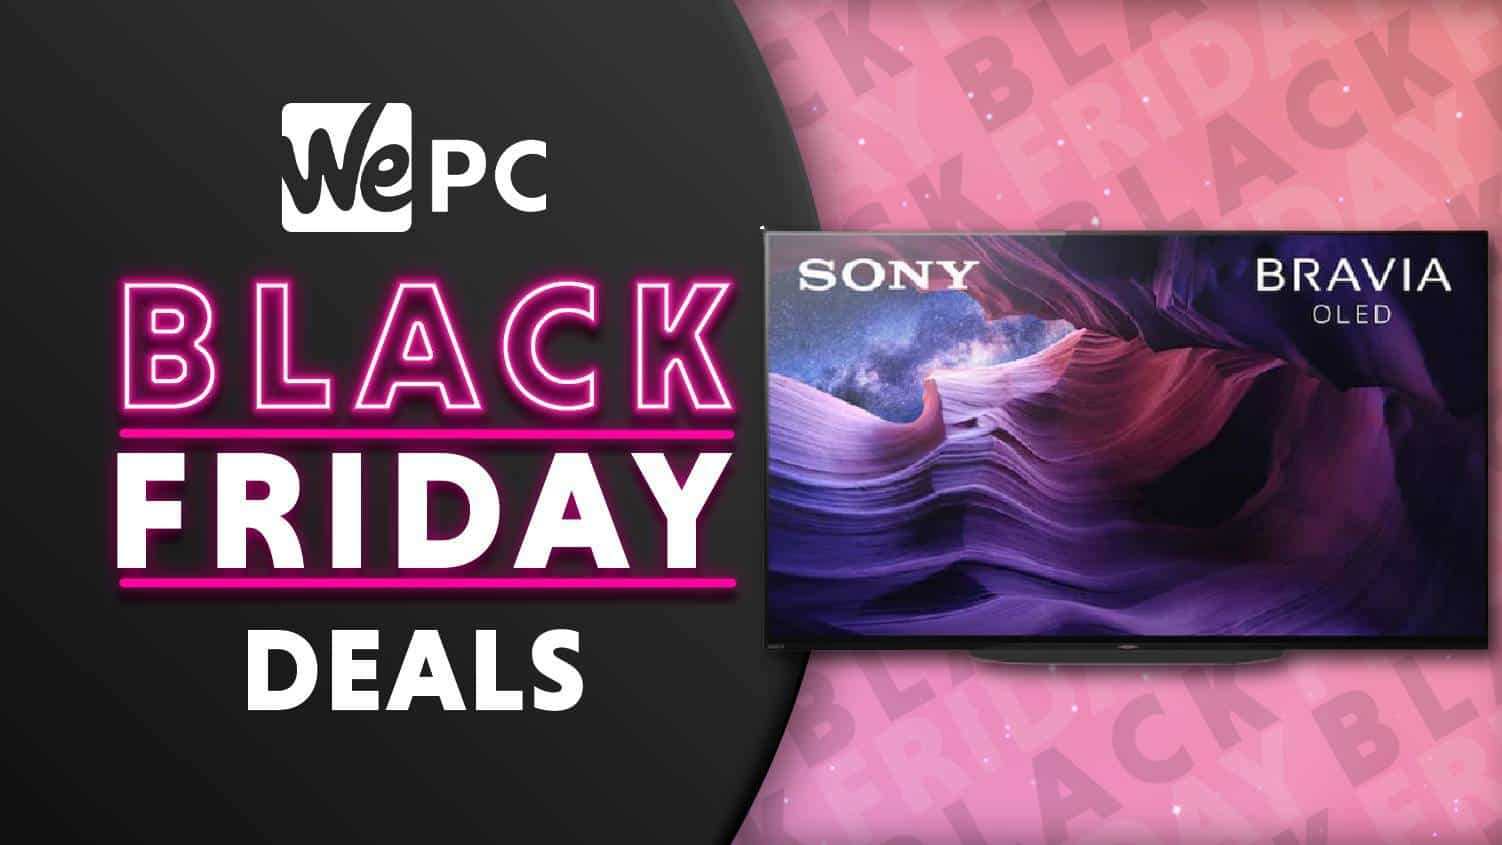 Sony Bravia Cyber Monday 4K TV deals: Save up to $1,500 on OLED TVs